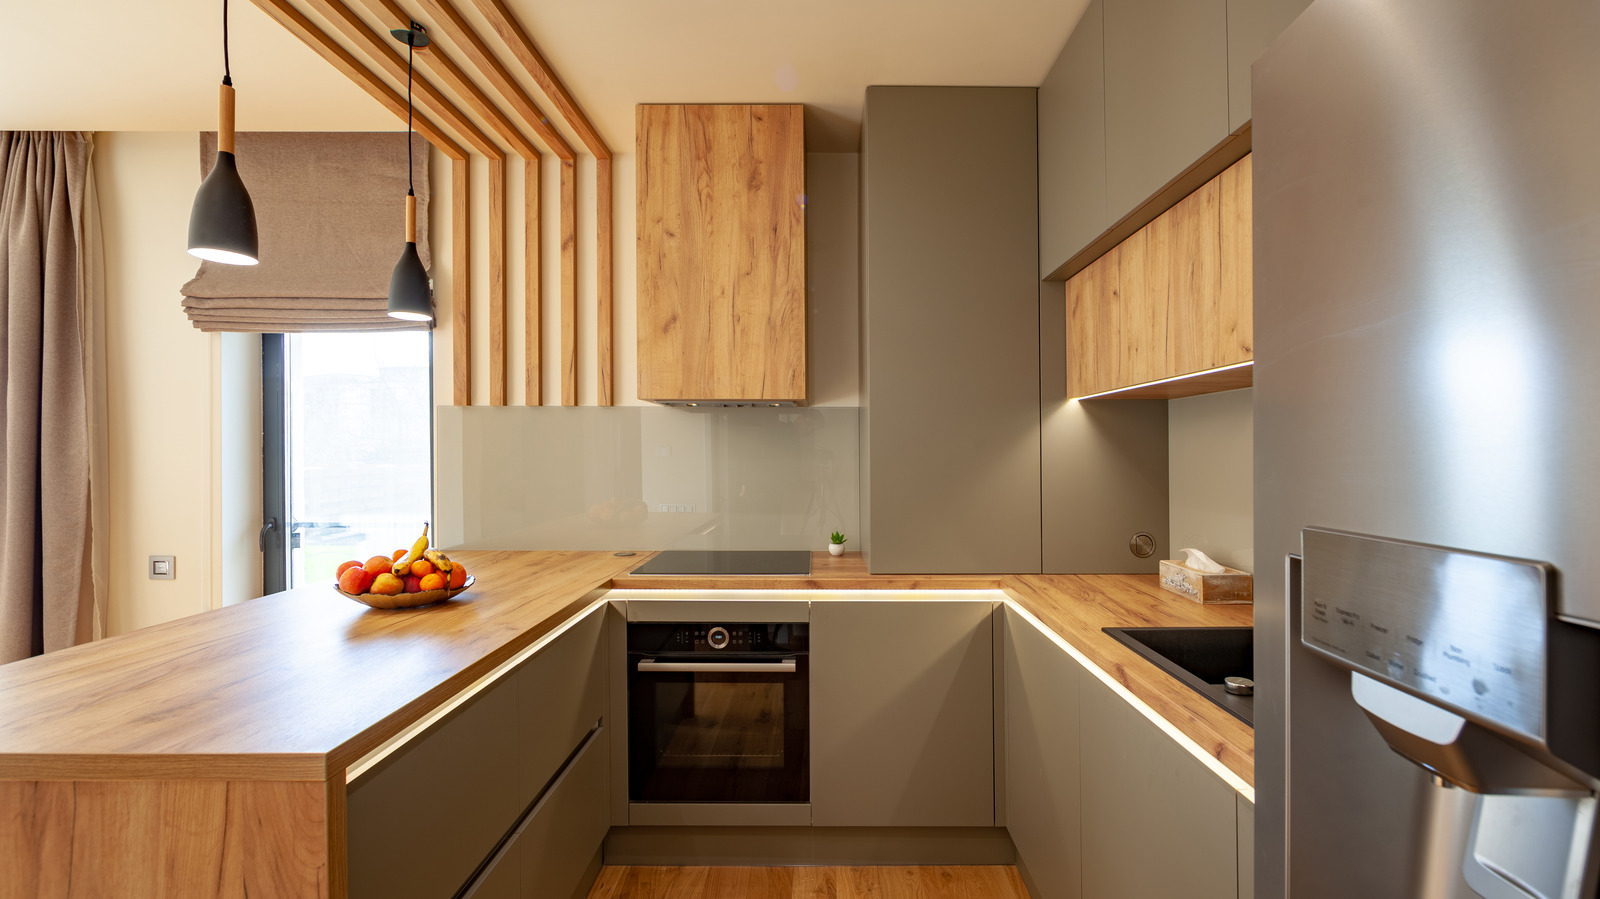 Kitchen Design Aesthetics You Should Be Aware Of